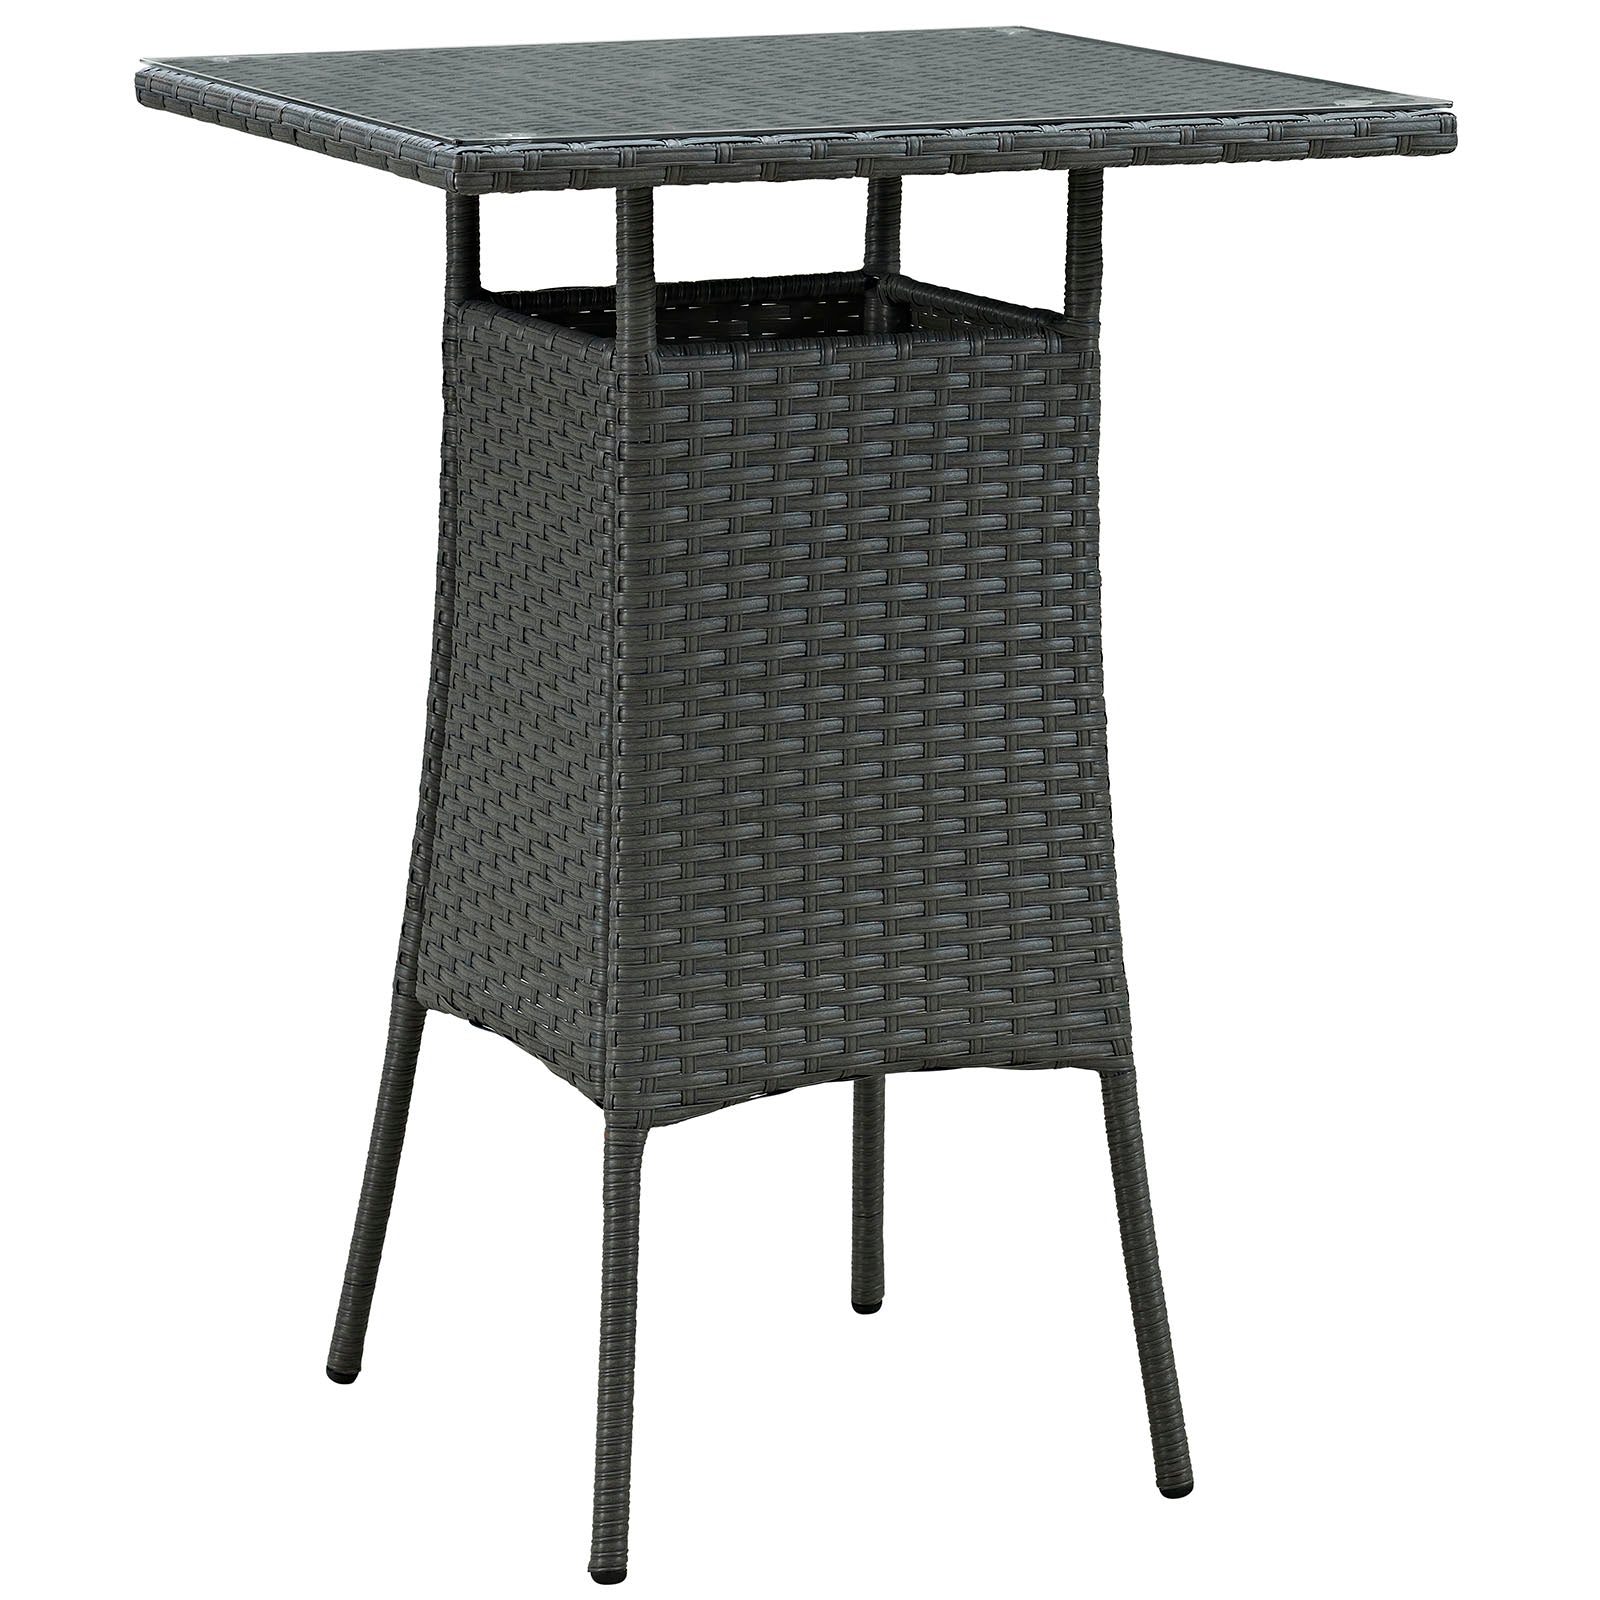 Sojourn Small Outdoor Patio Bar Table - East Shore Modern Home Furnishings